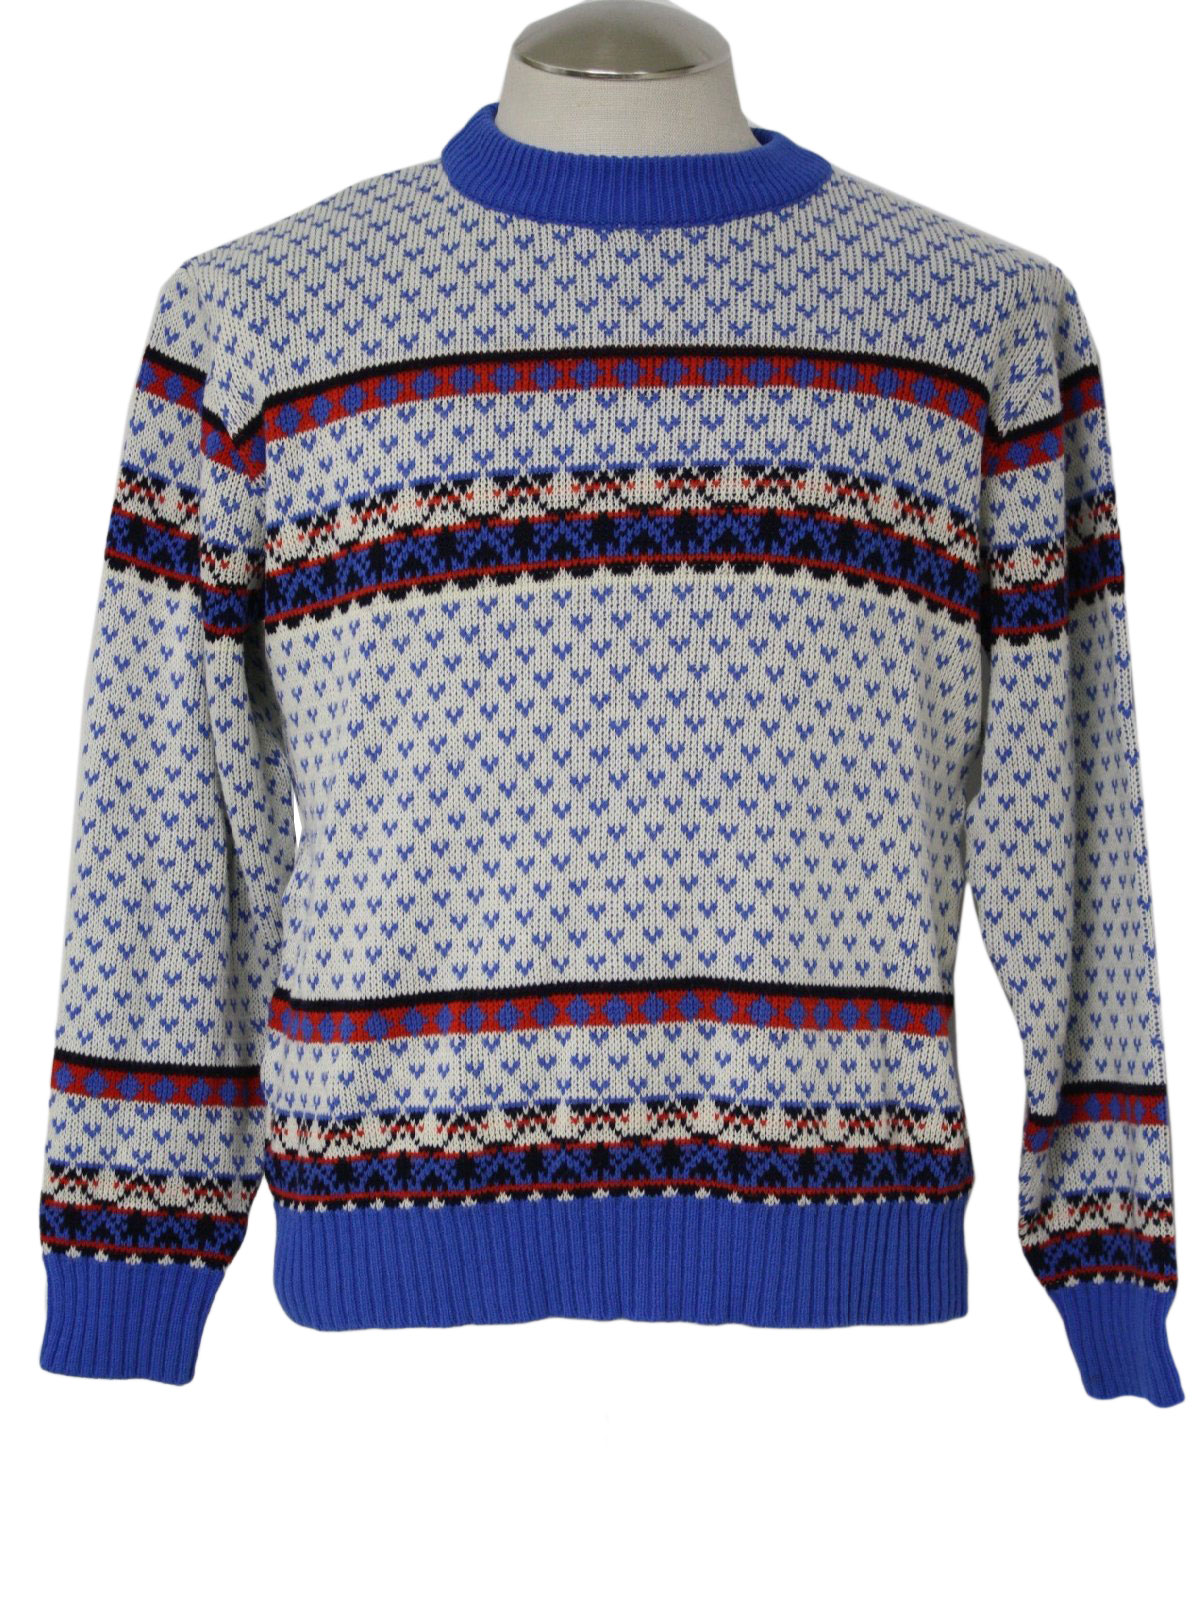 1980's Retro Sweater: Early 80s -Kraft- Unisex white, blue, red and ...